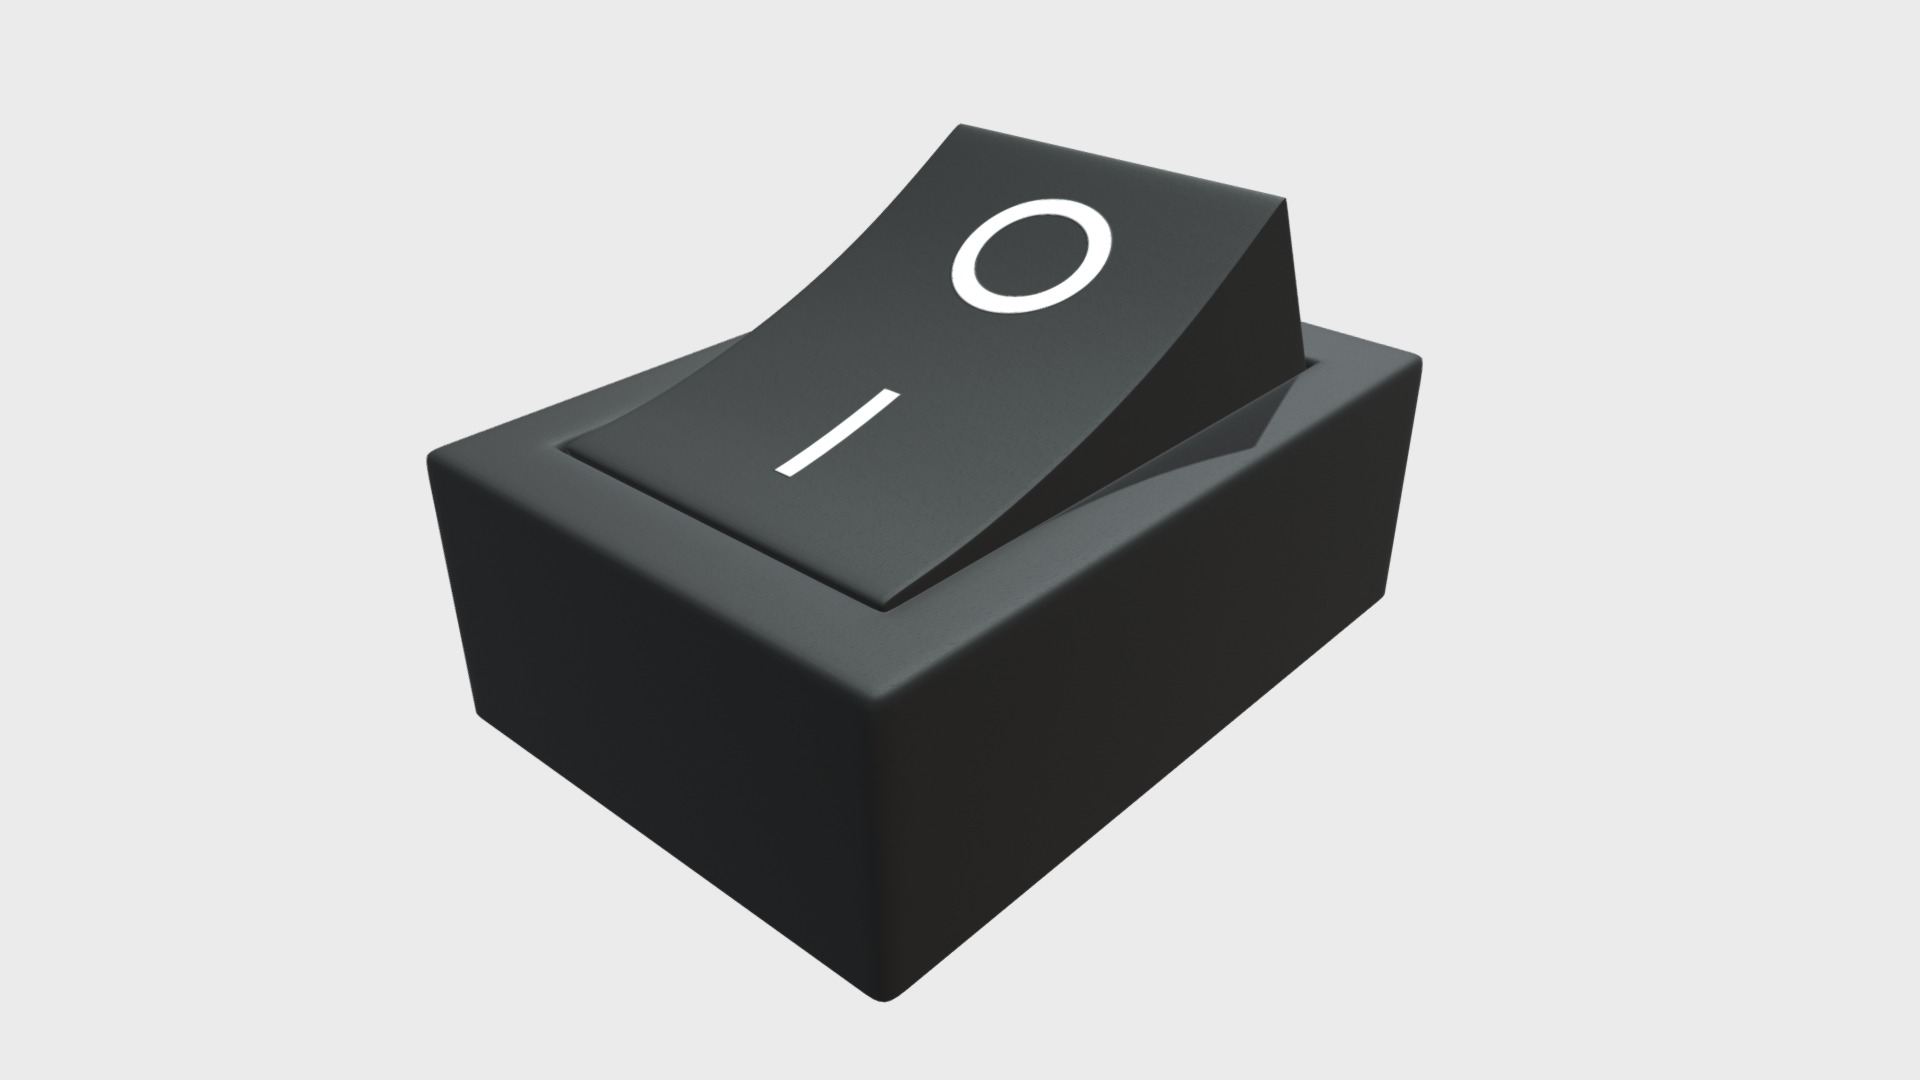 3D model On / Off power switch - This is a 3D model of the On / Off power switch. The 3D model is about a black box with a white circle on the top.